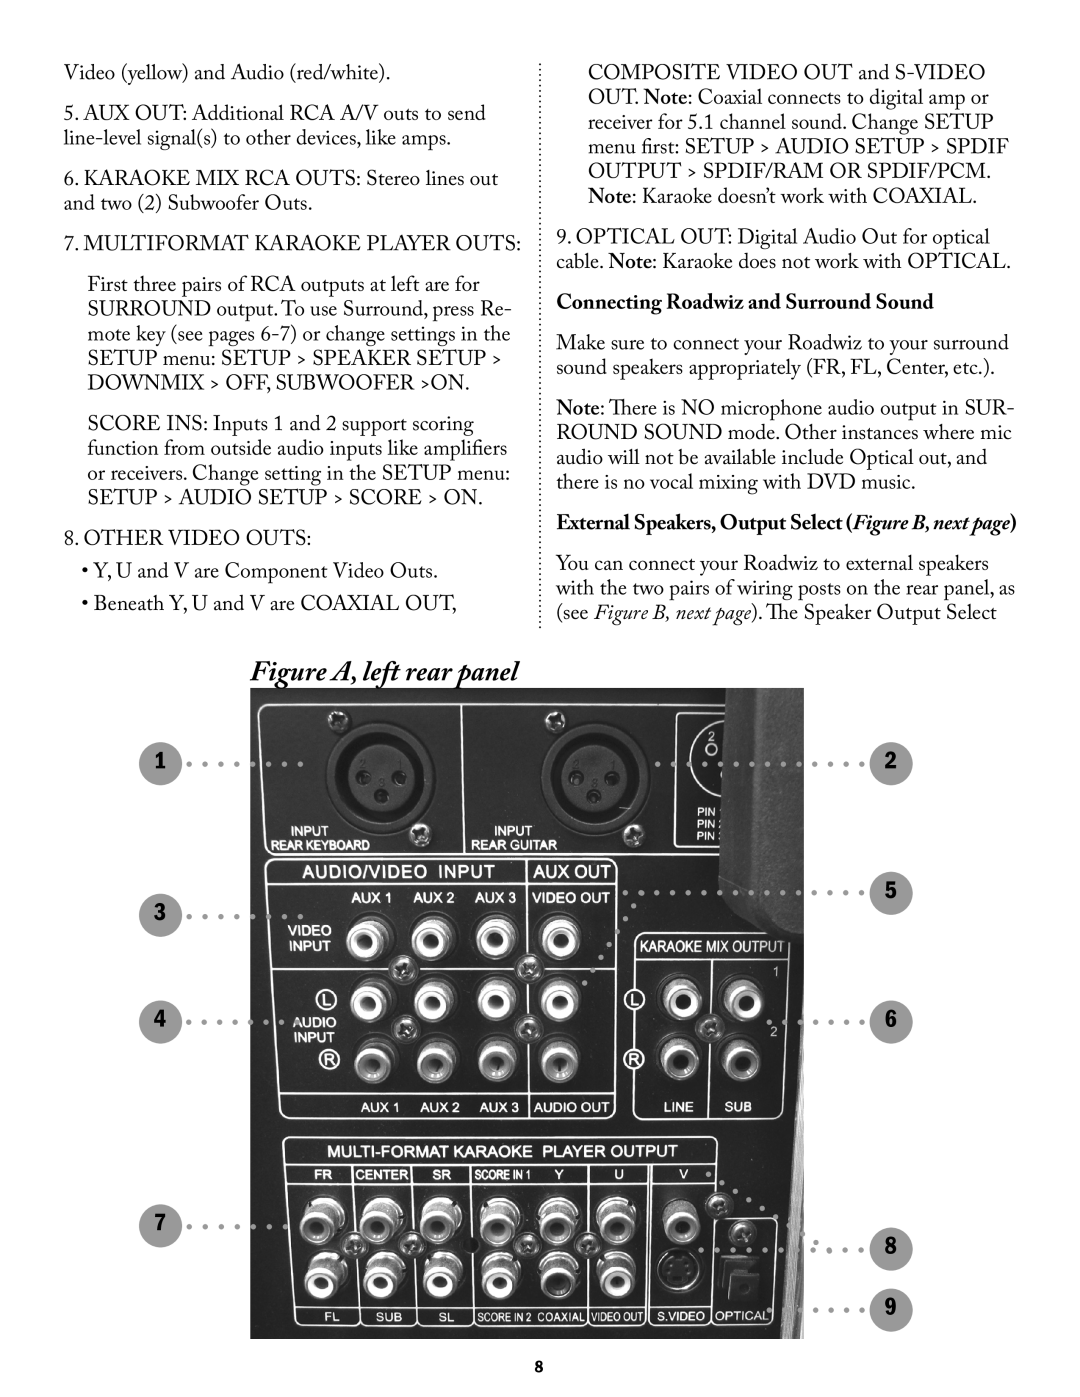 Acesonic PK-1290 user manual Figure A, left rear panel, Connecting Roadwiz and Surround Sound 